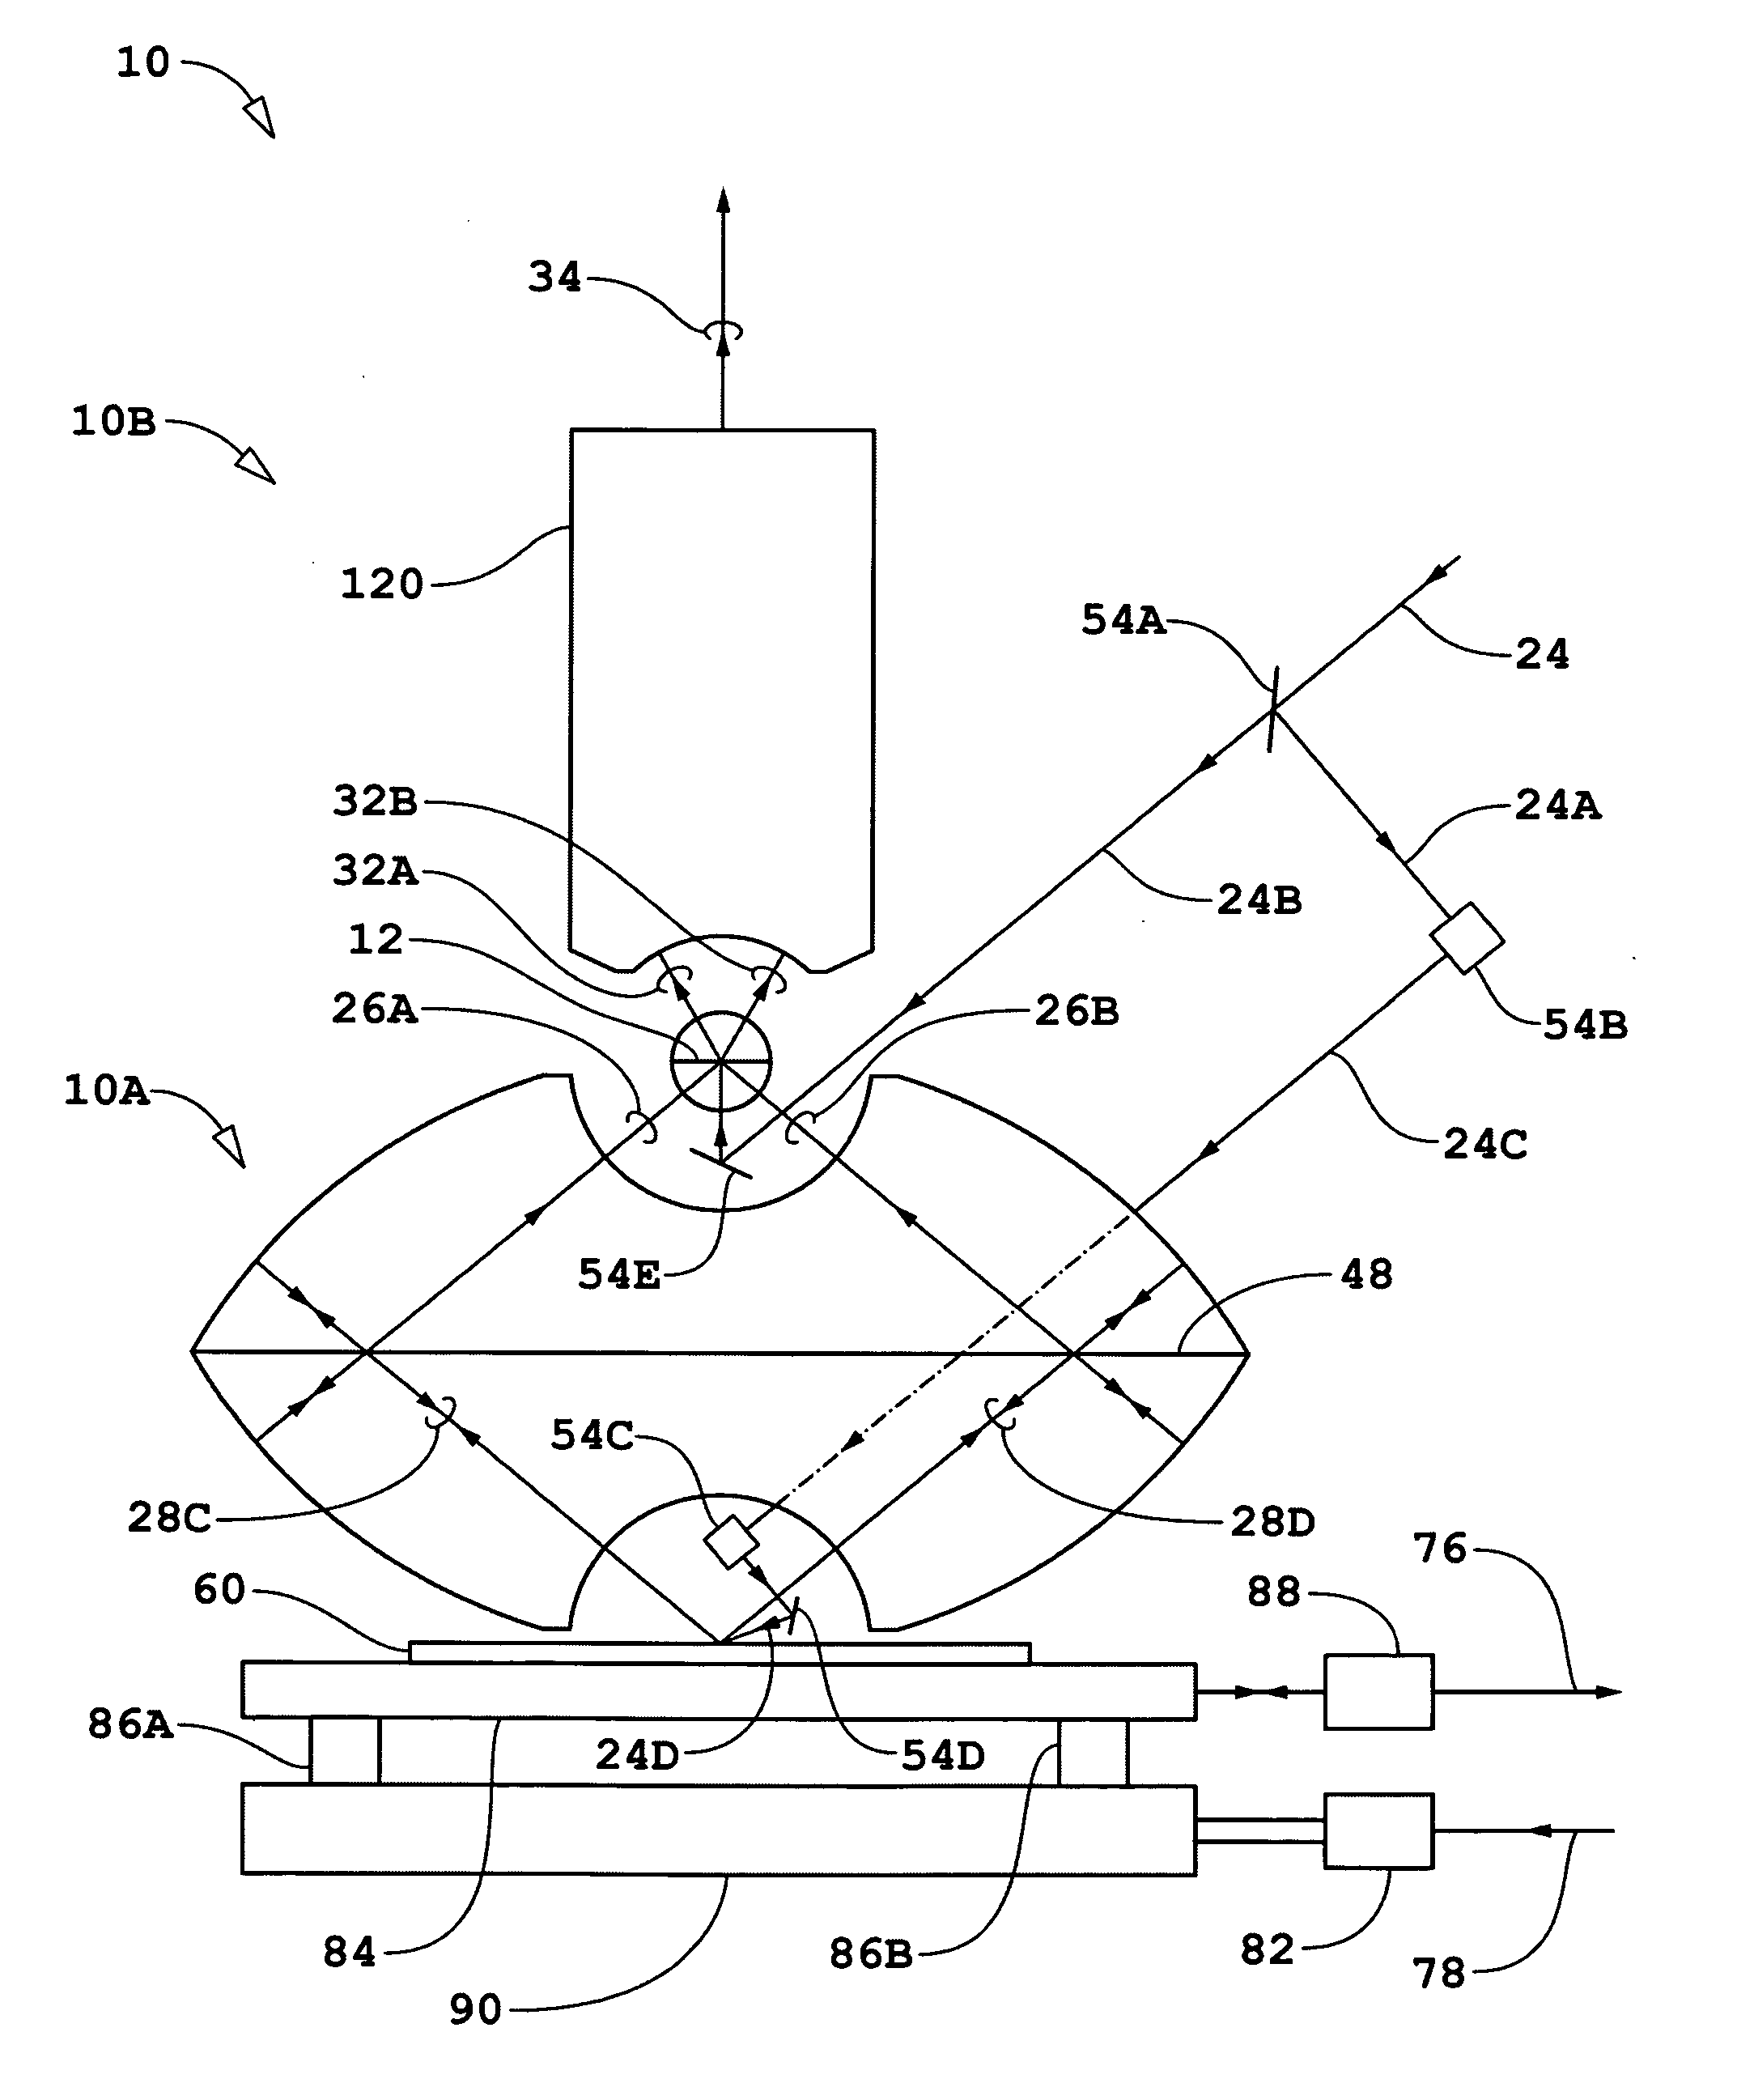 Catoptric and catadioptric imaging system with pellicle and aperture-array beam-splitters and non-adaptive and adaptive catoptric surfaces